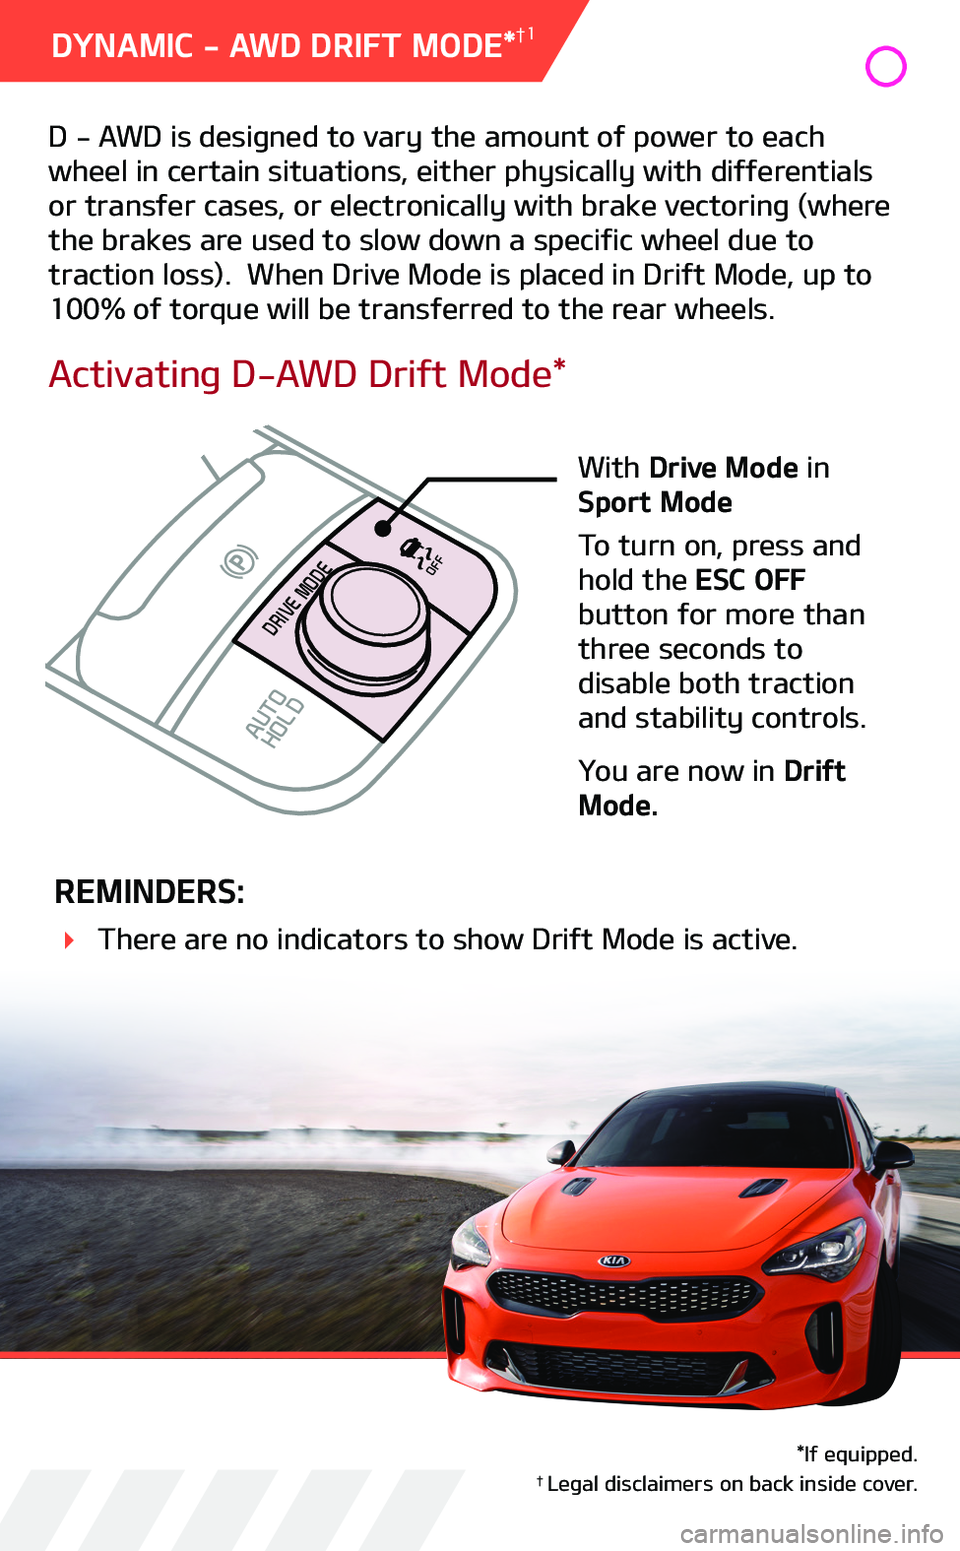 KIA STINGER 2019  Performance Features DYNAMIC - AWD DRIFT MODE*†1
D - AWD is designed to vary the amount of power to each wheel in certain situations, either physically with differentials or transfer cases, or electronically with brake 